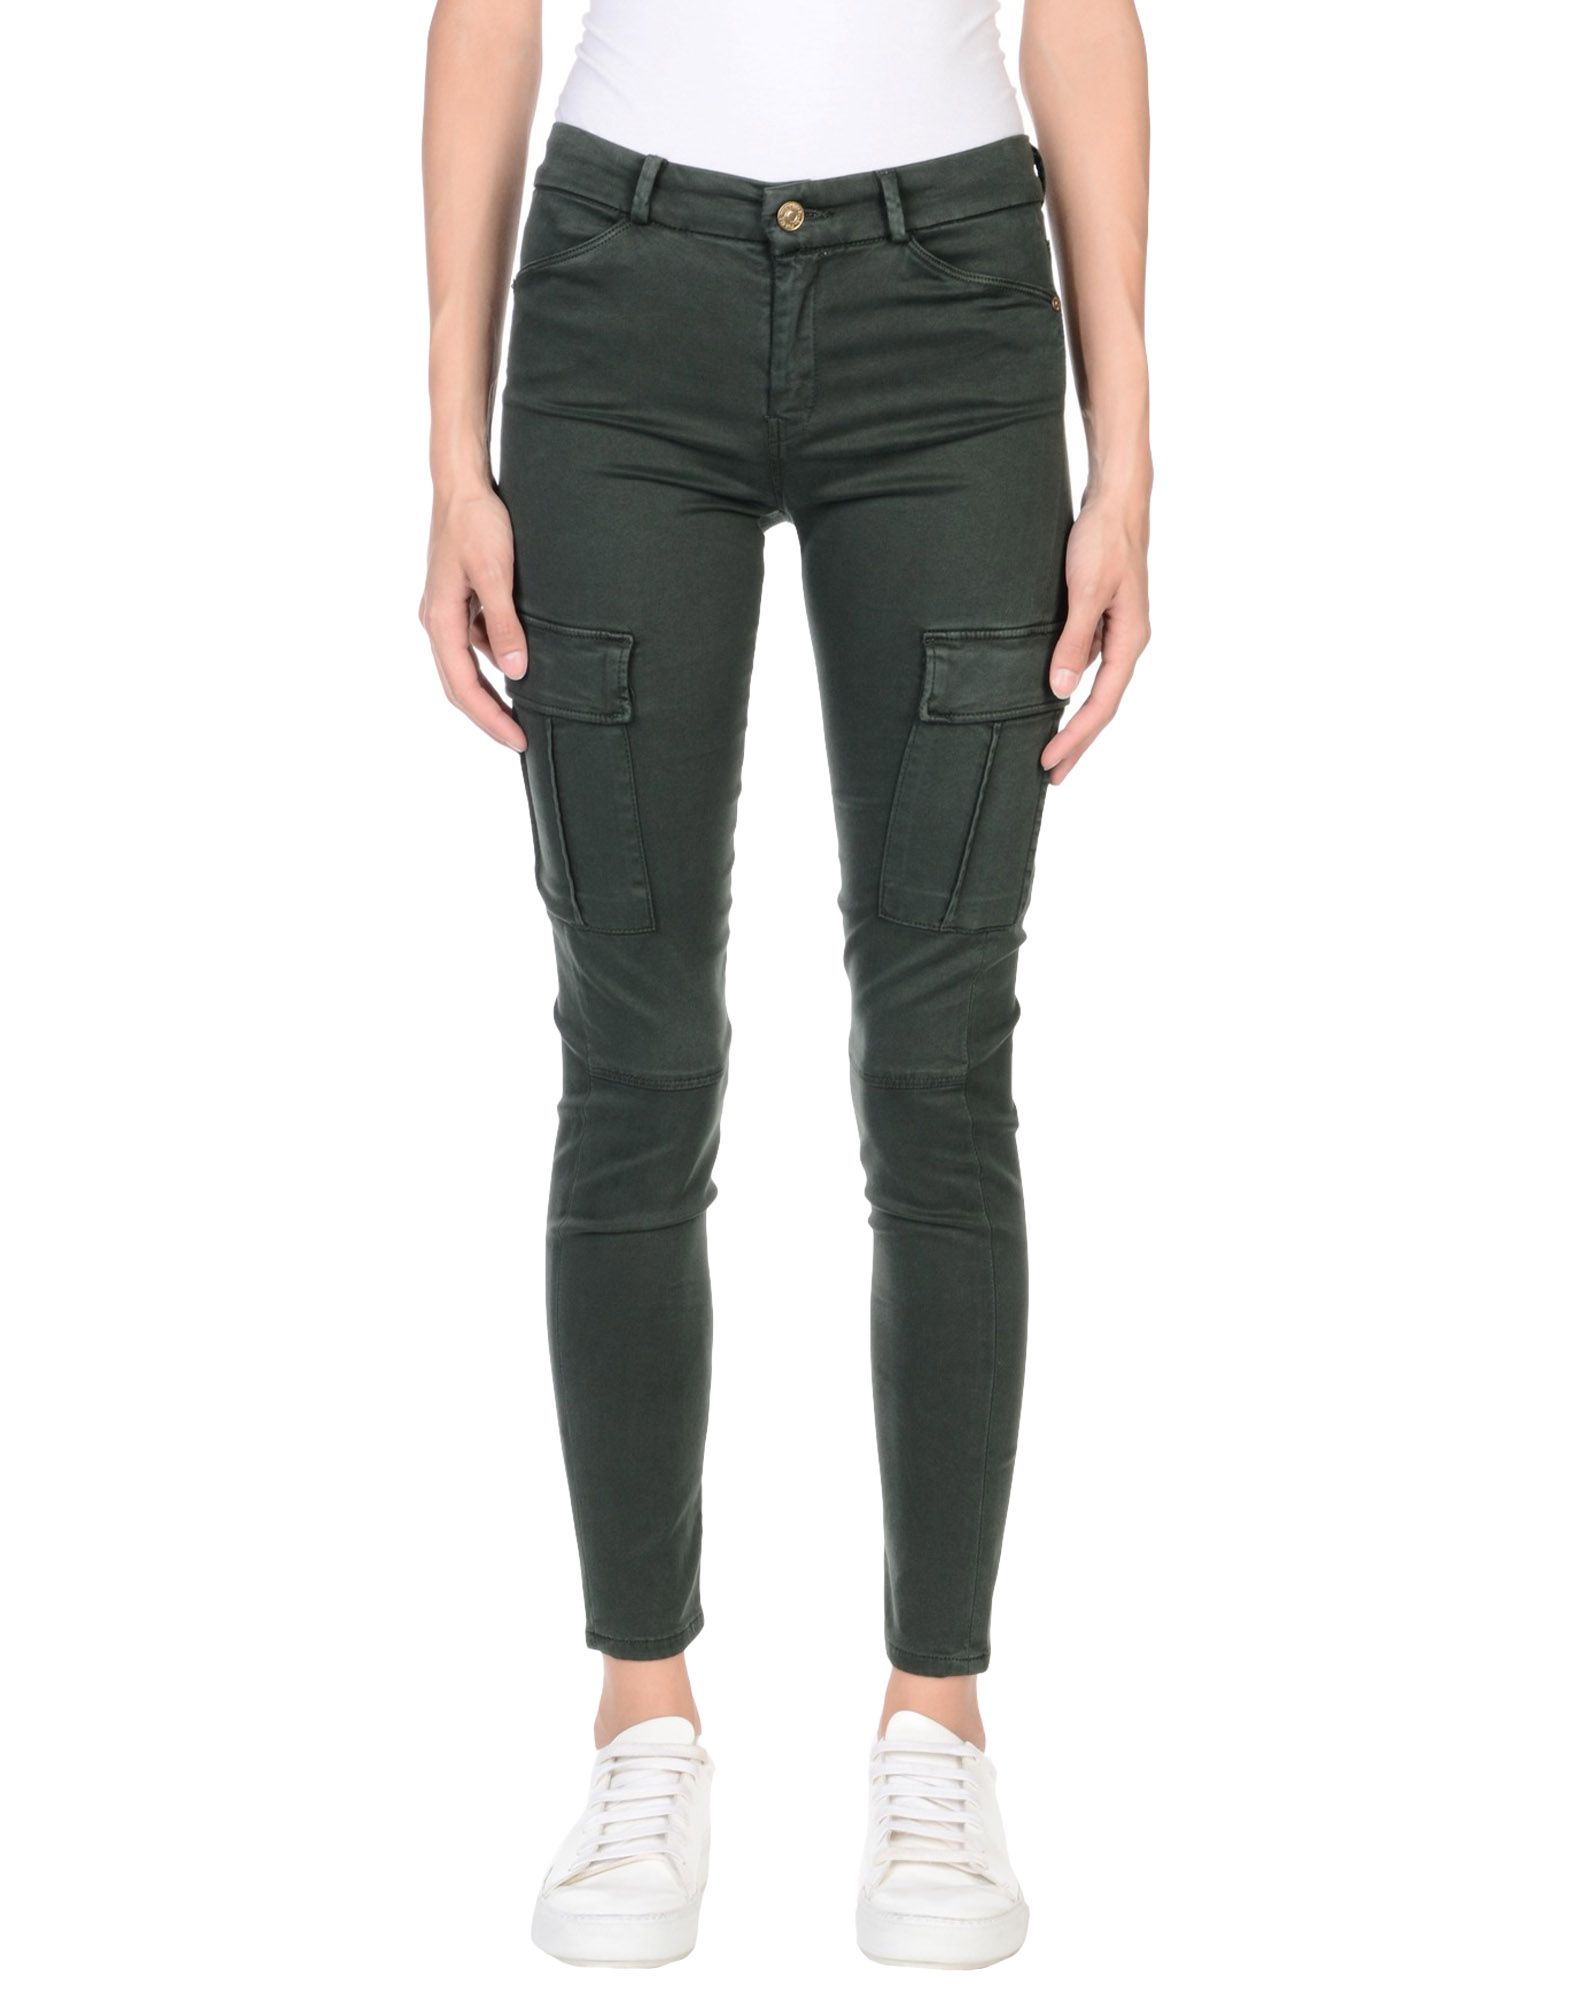 7 FOR ALL MANKIND Casual pants,36925083LK 1